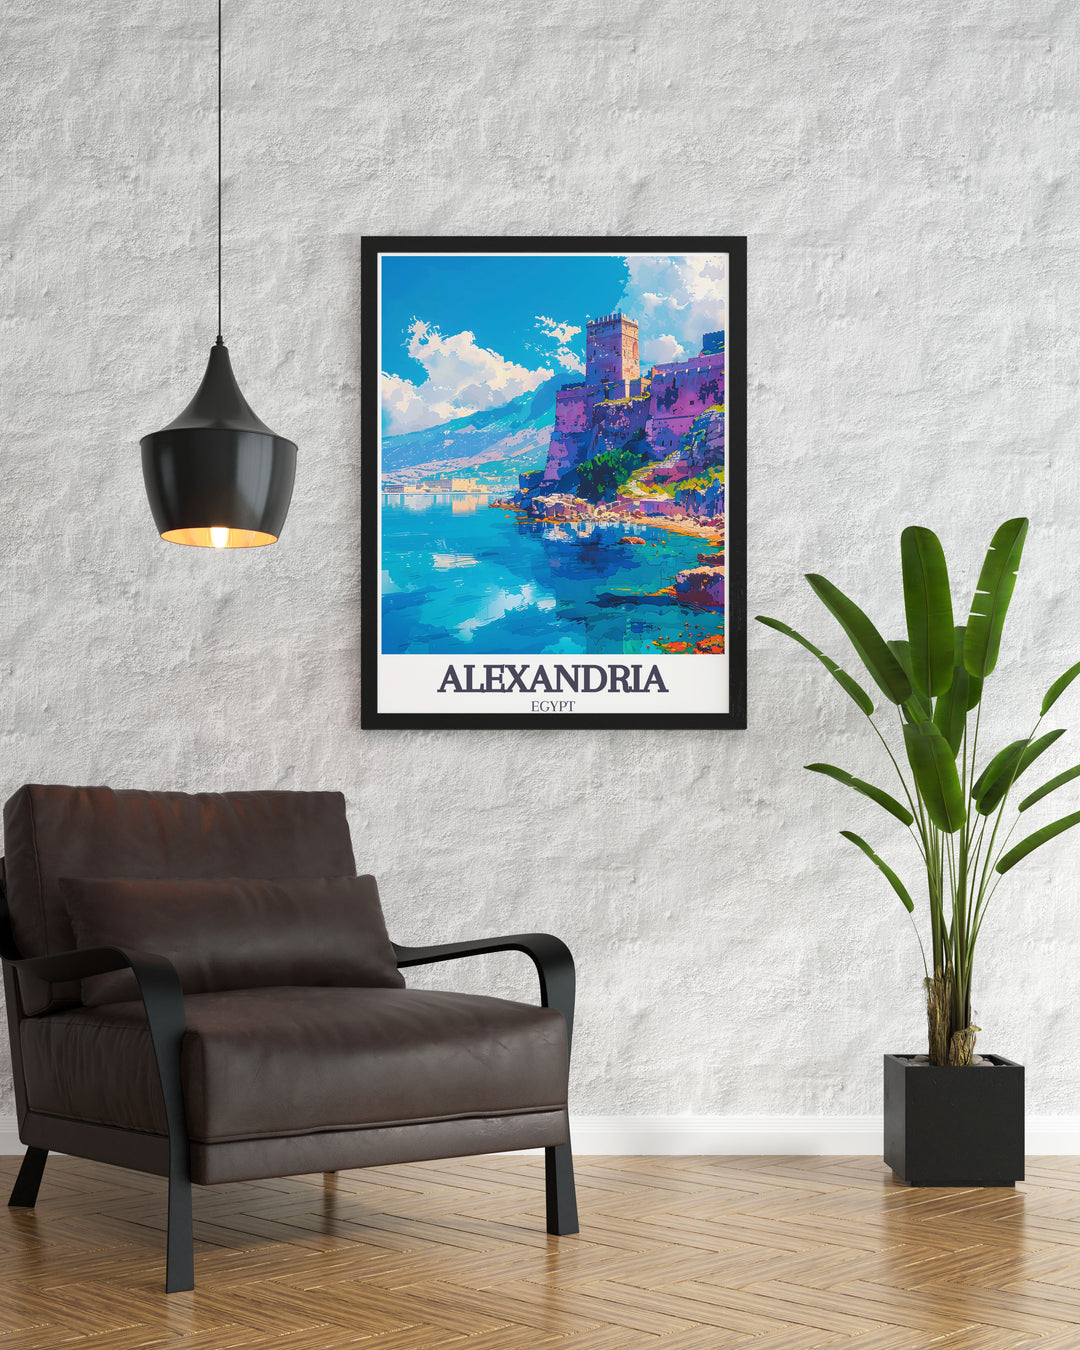 This Alexandria Egypt map and city print features the Citadel of Qaitbay Pharos Lighthouse in vivid colors. Perfect for adding sophistication to your decor, this beautiful art piece captures the rich heritage and timeless beauty of one of Egypts most famous cities.